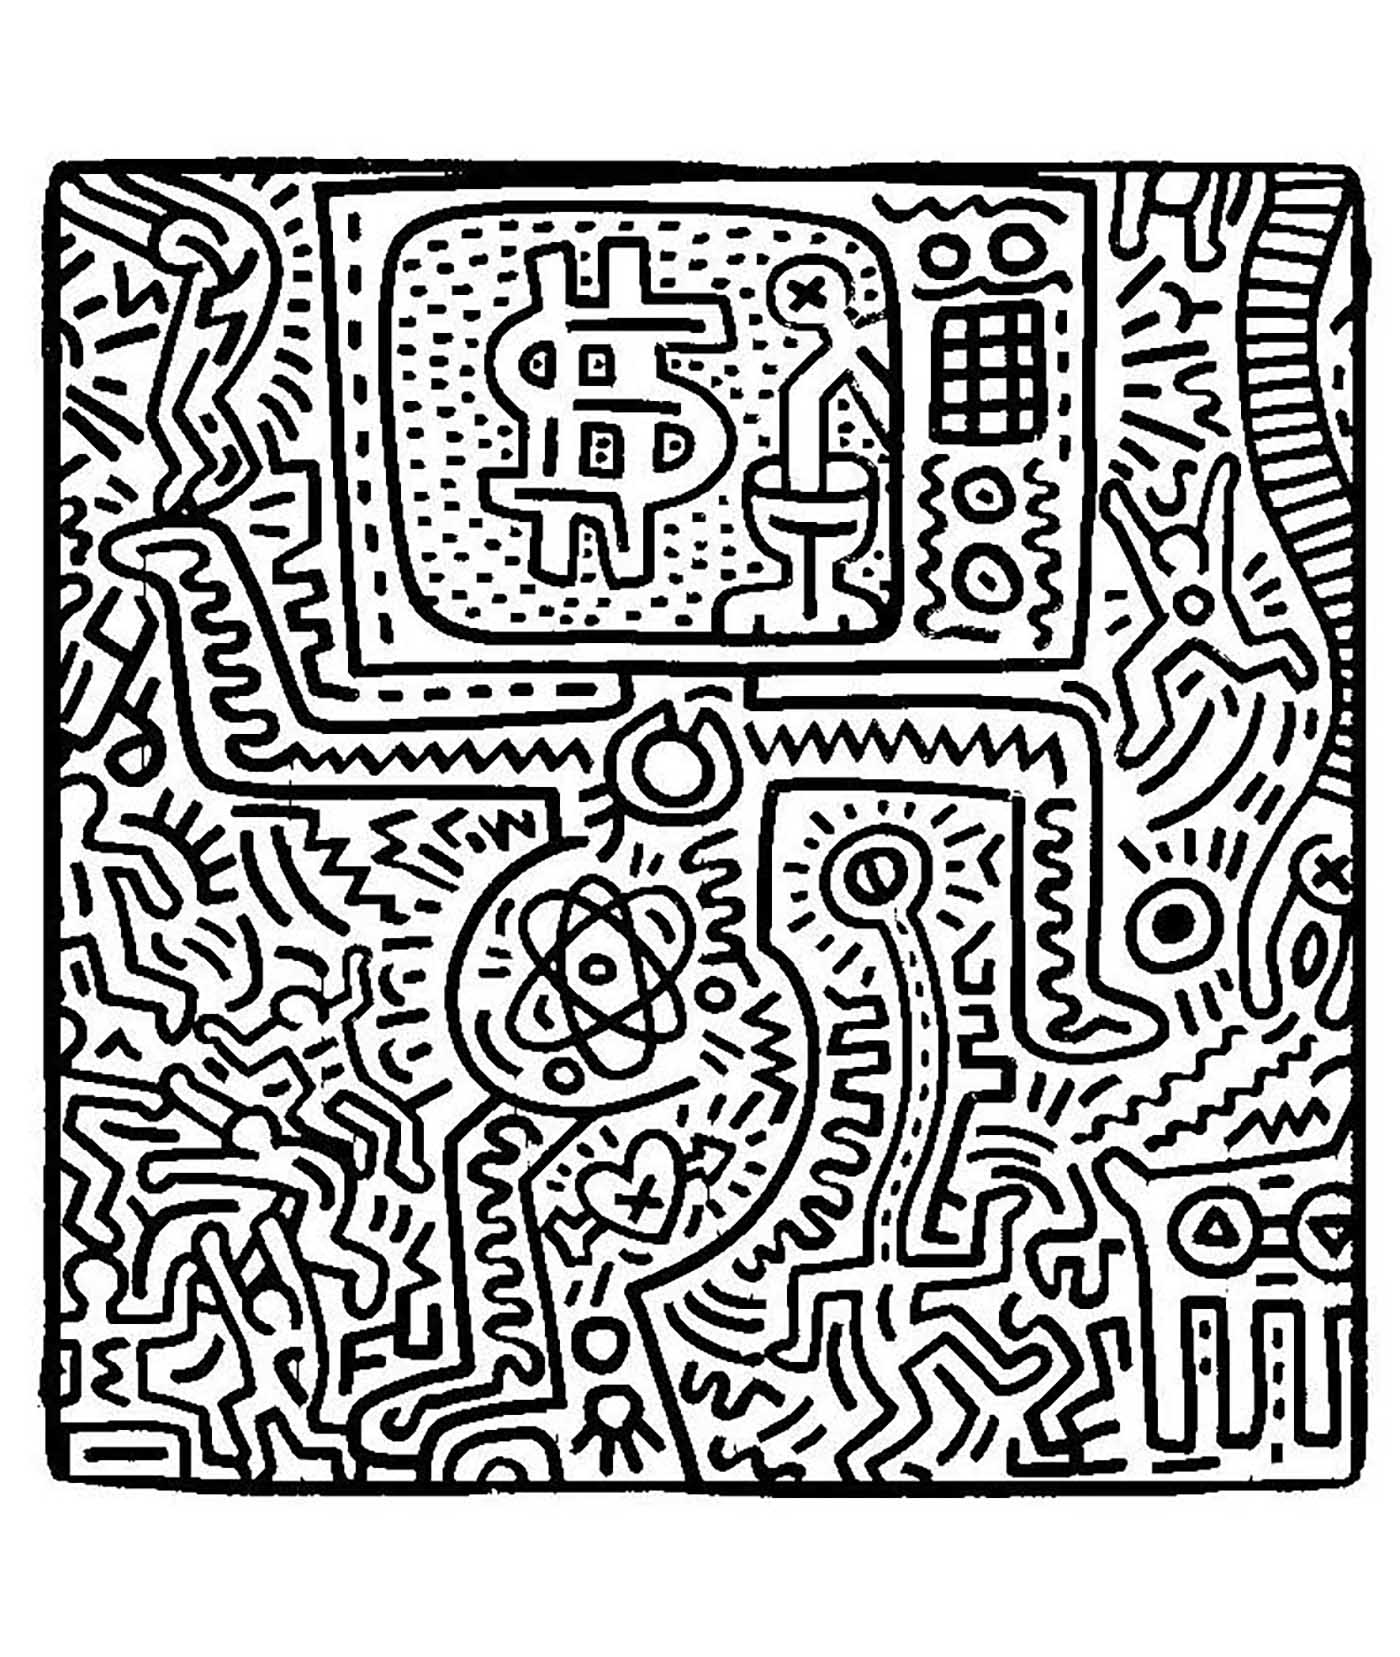 Coloring page created from a Keith Haring painting